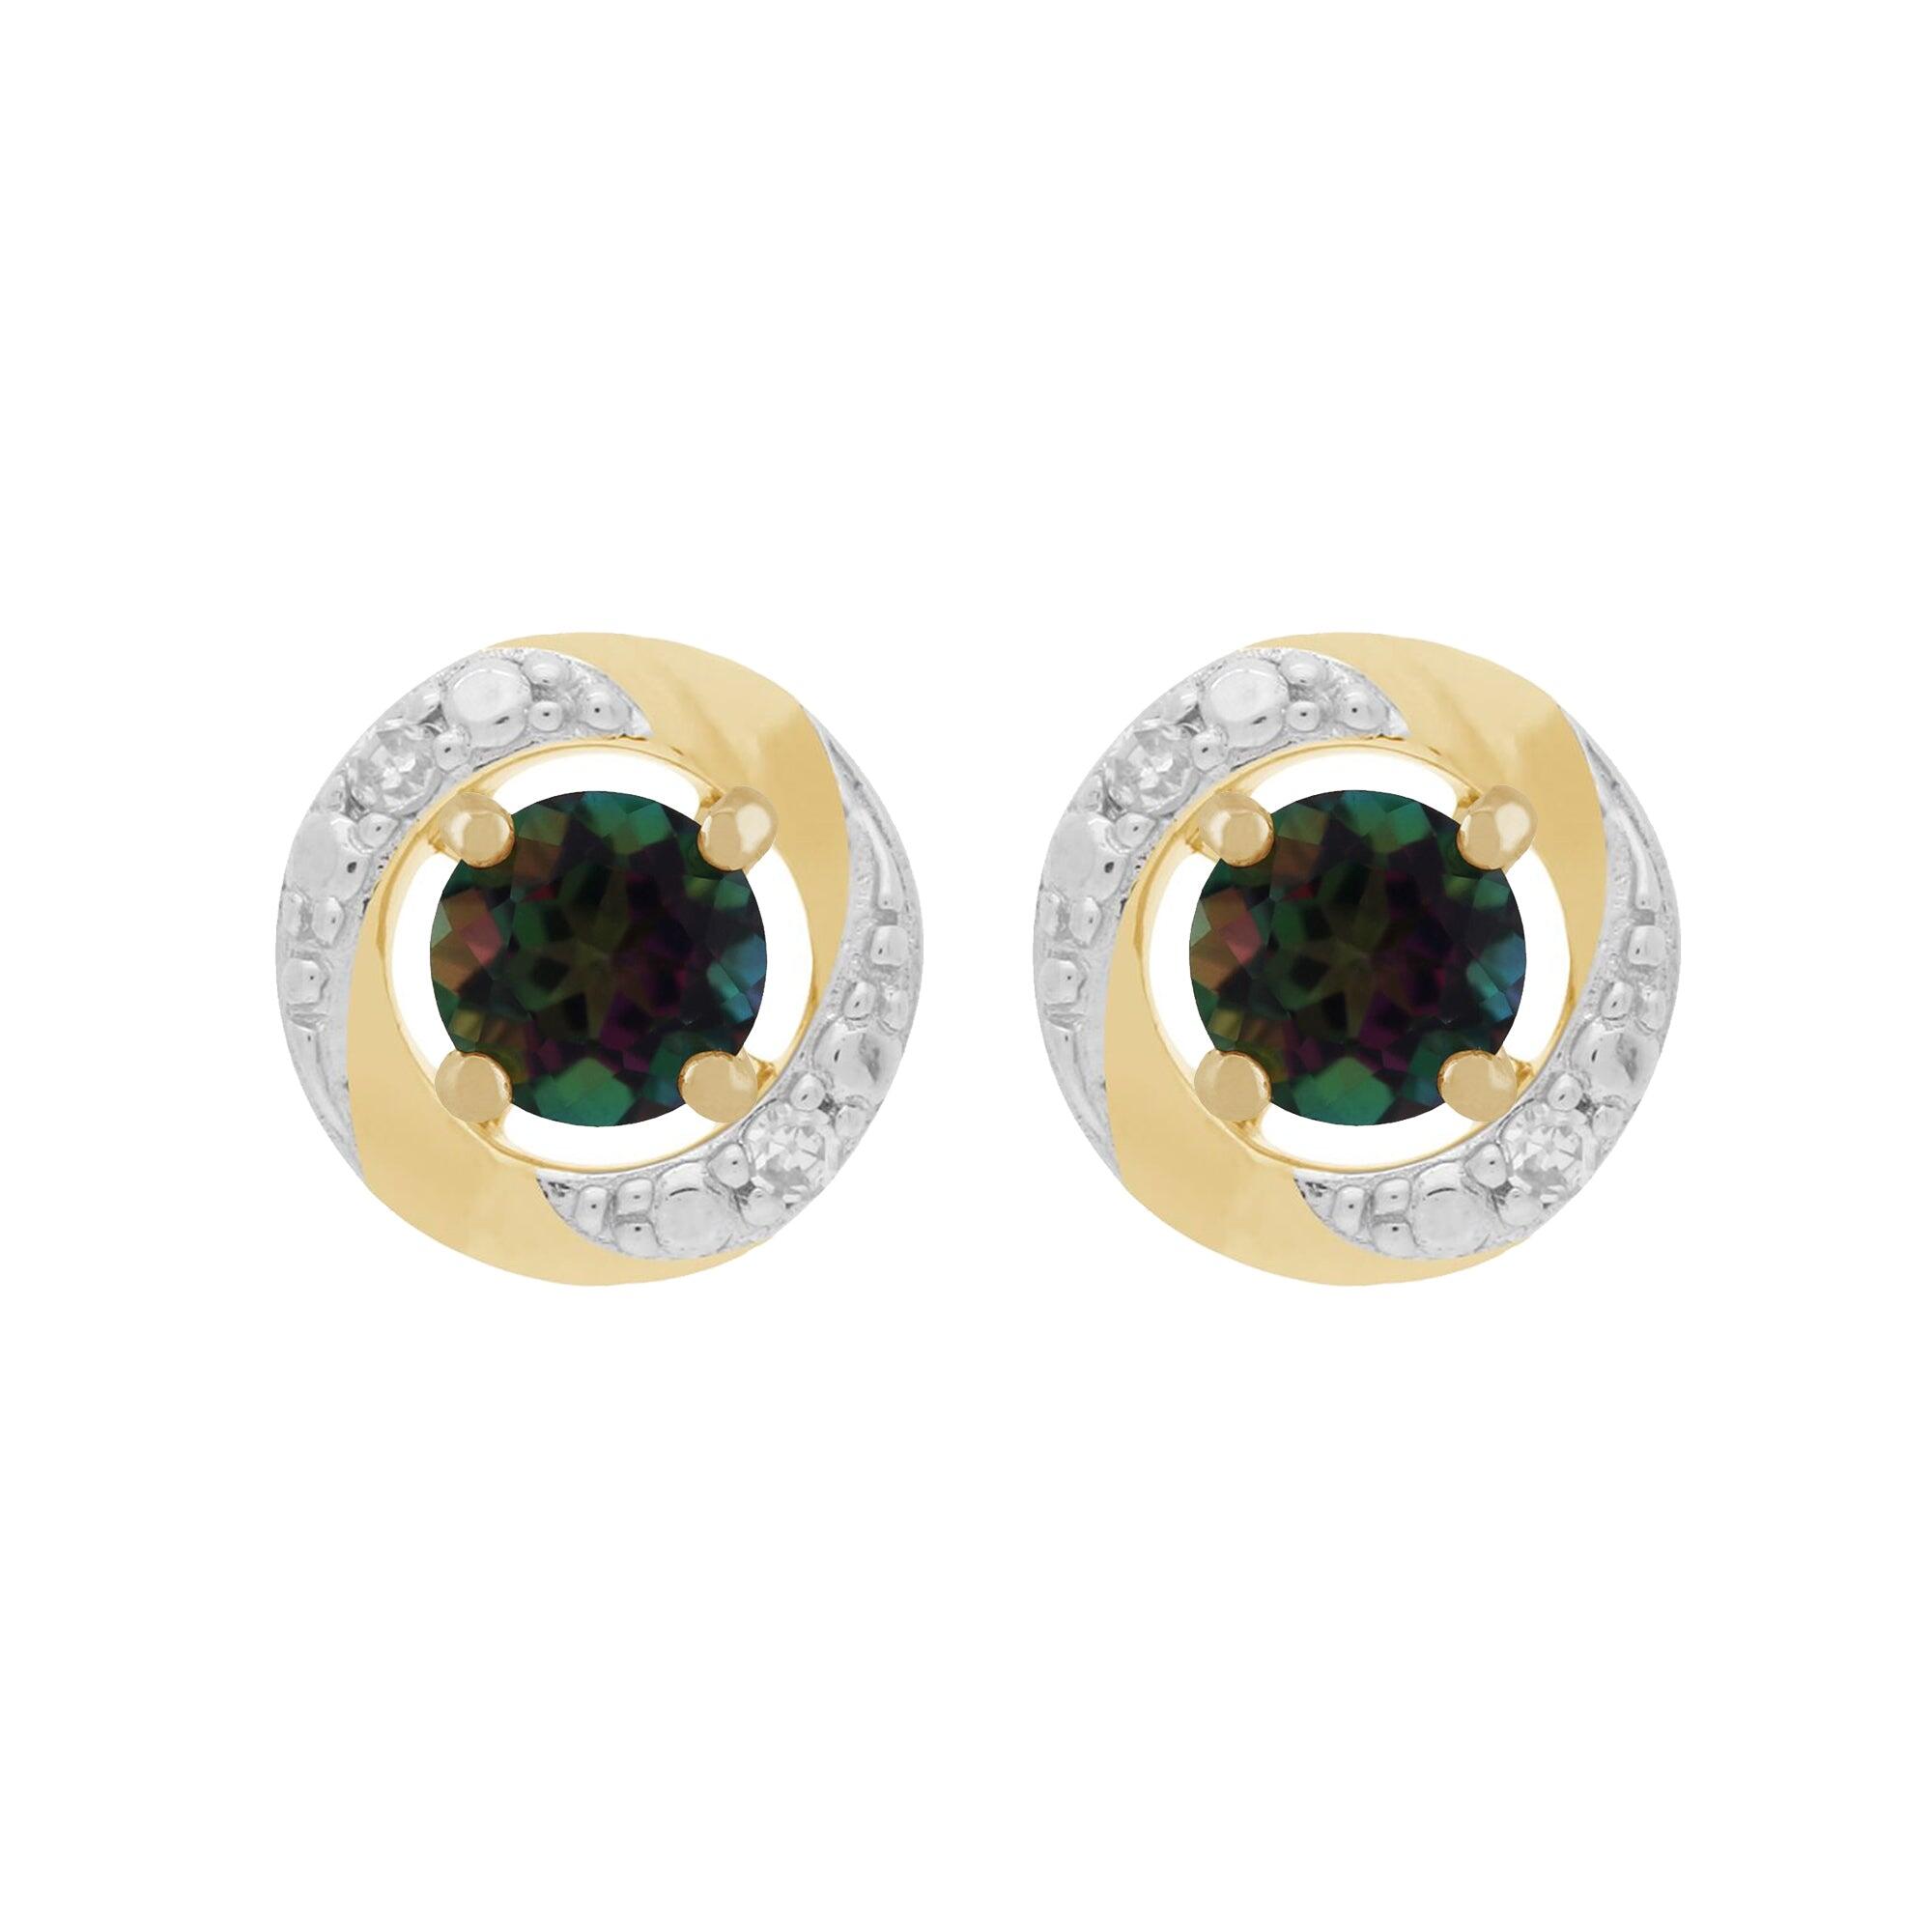 Round Mystic Topaz Stud Earrings with Detachable Diamond Halo Jacket in 9ct  Gold